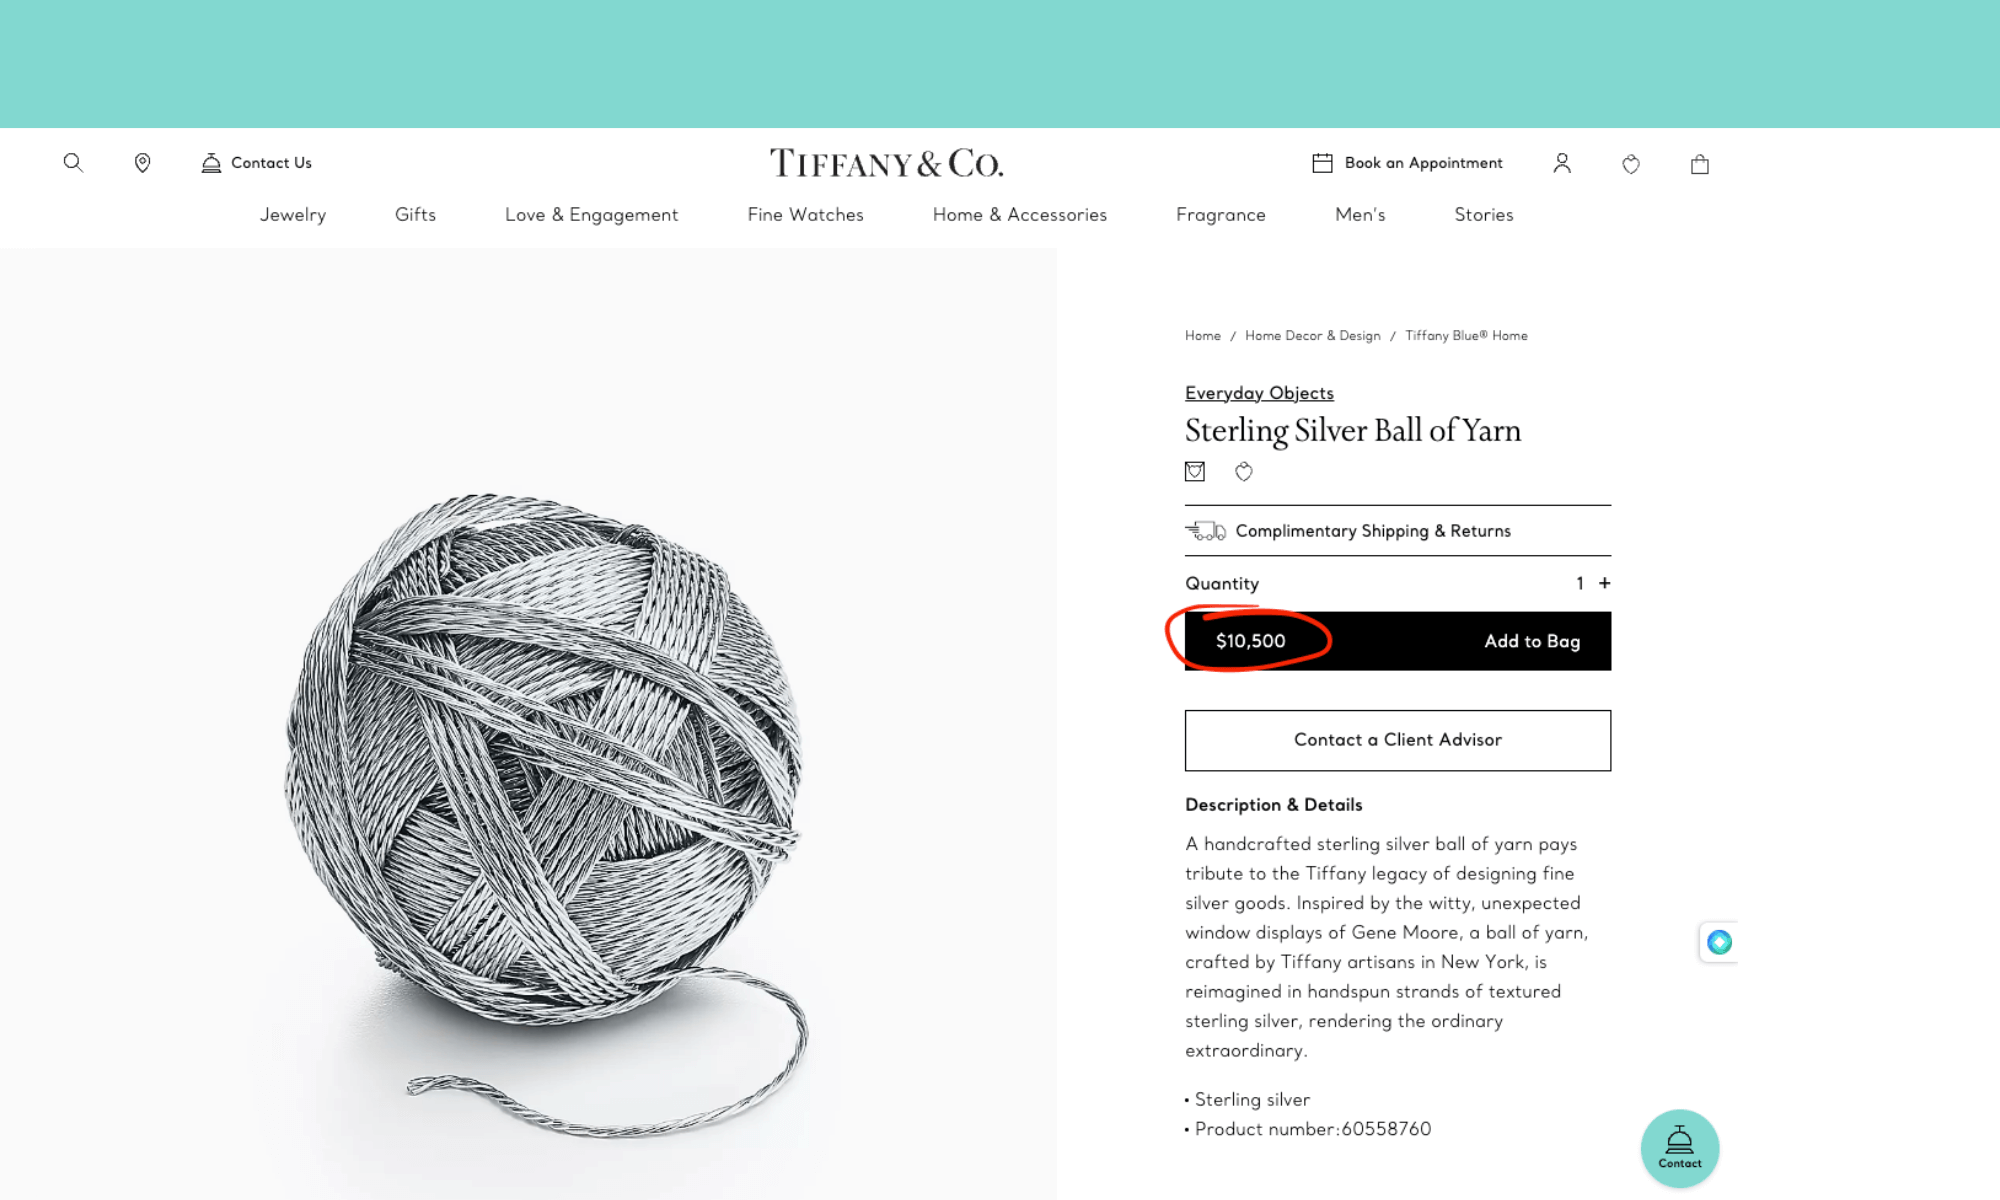 What is Strategic Pricing? This image illustrates strategic pricing by showcasing Tiffany & Co.'s strategic pricing with a nearly $11,000 silver ball of yarn.